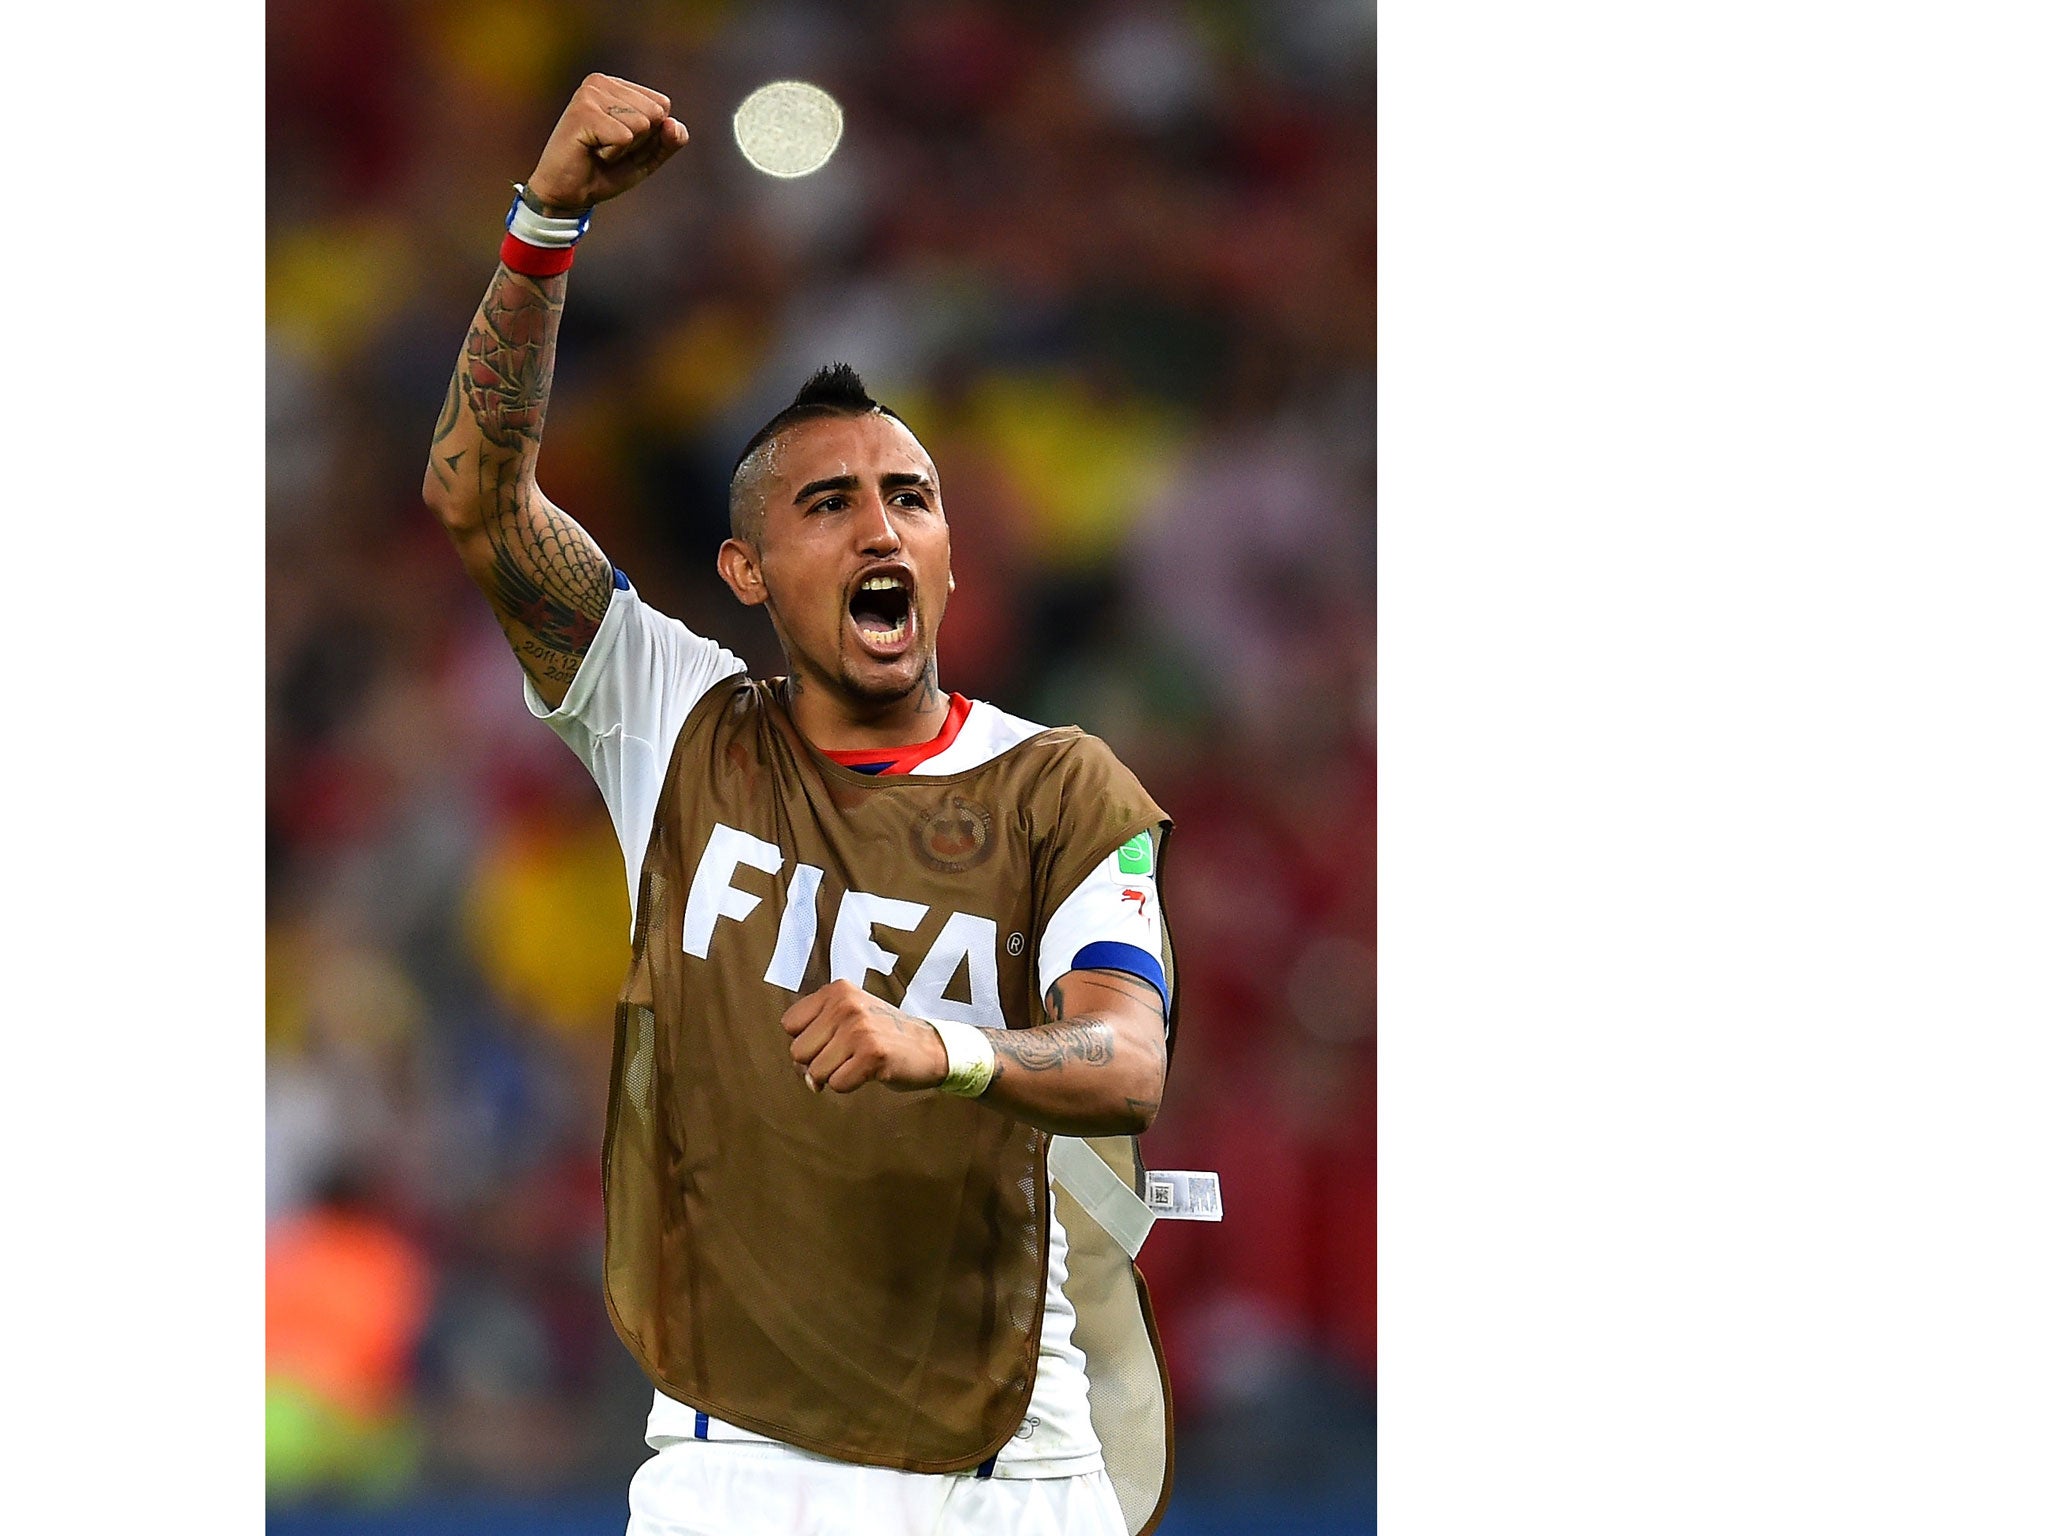 Juventus midfielder Arturo Vidal is a target for Manchester United and Liverpool